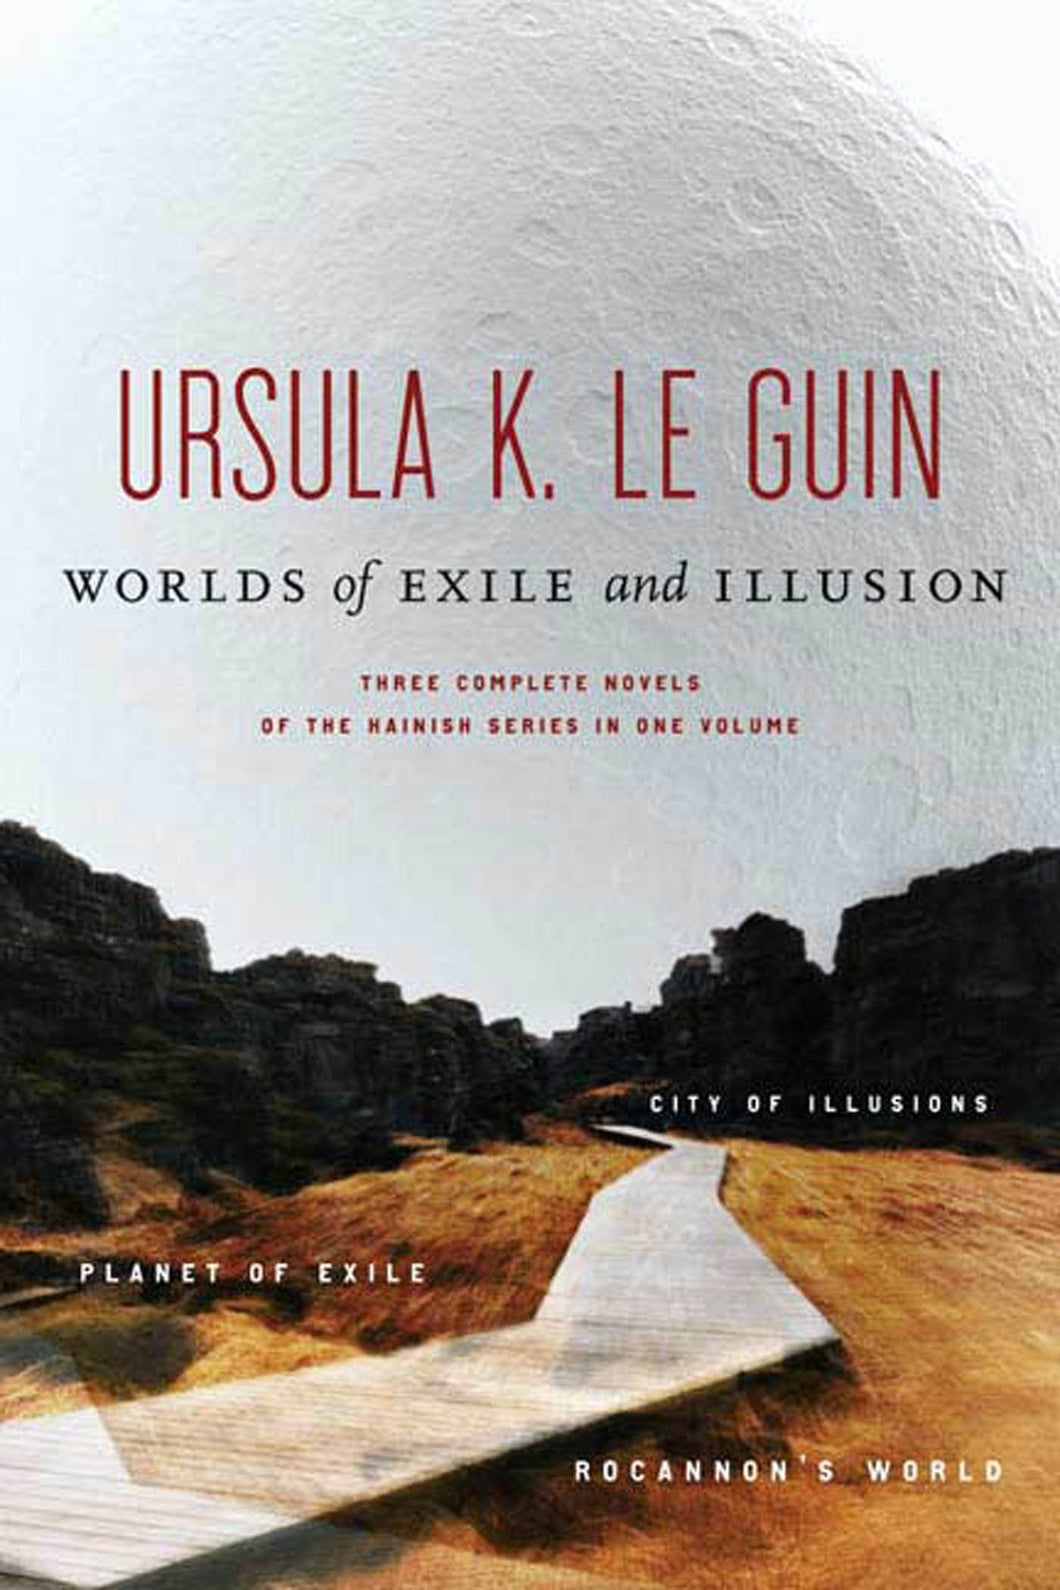 Worlds of Exile and Illusion by Ursula Le Guin